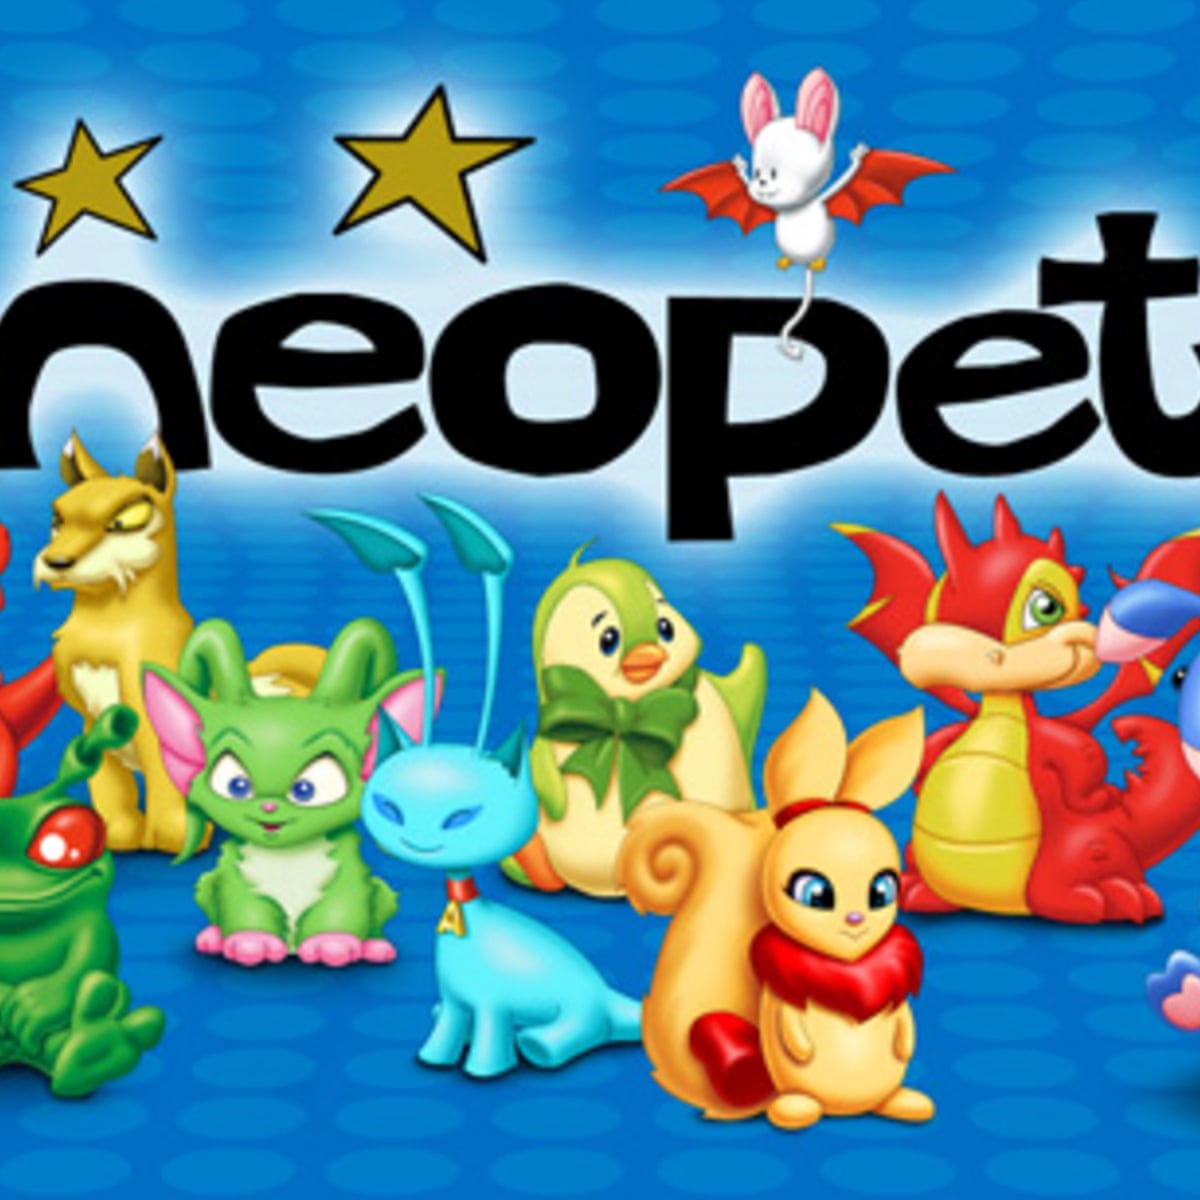 Virtual Pet Game Neopets Returns But Should It Stay In The Past Games The Guardian - best animal games in roblox 2019